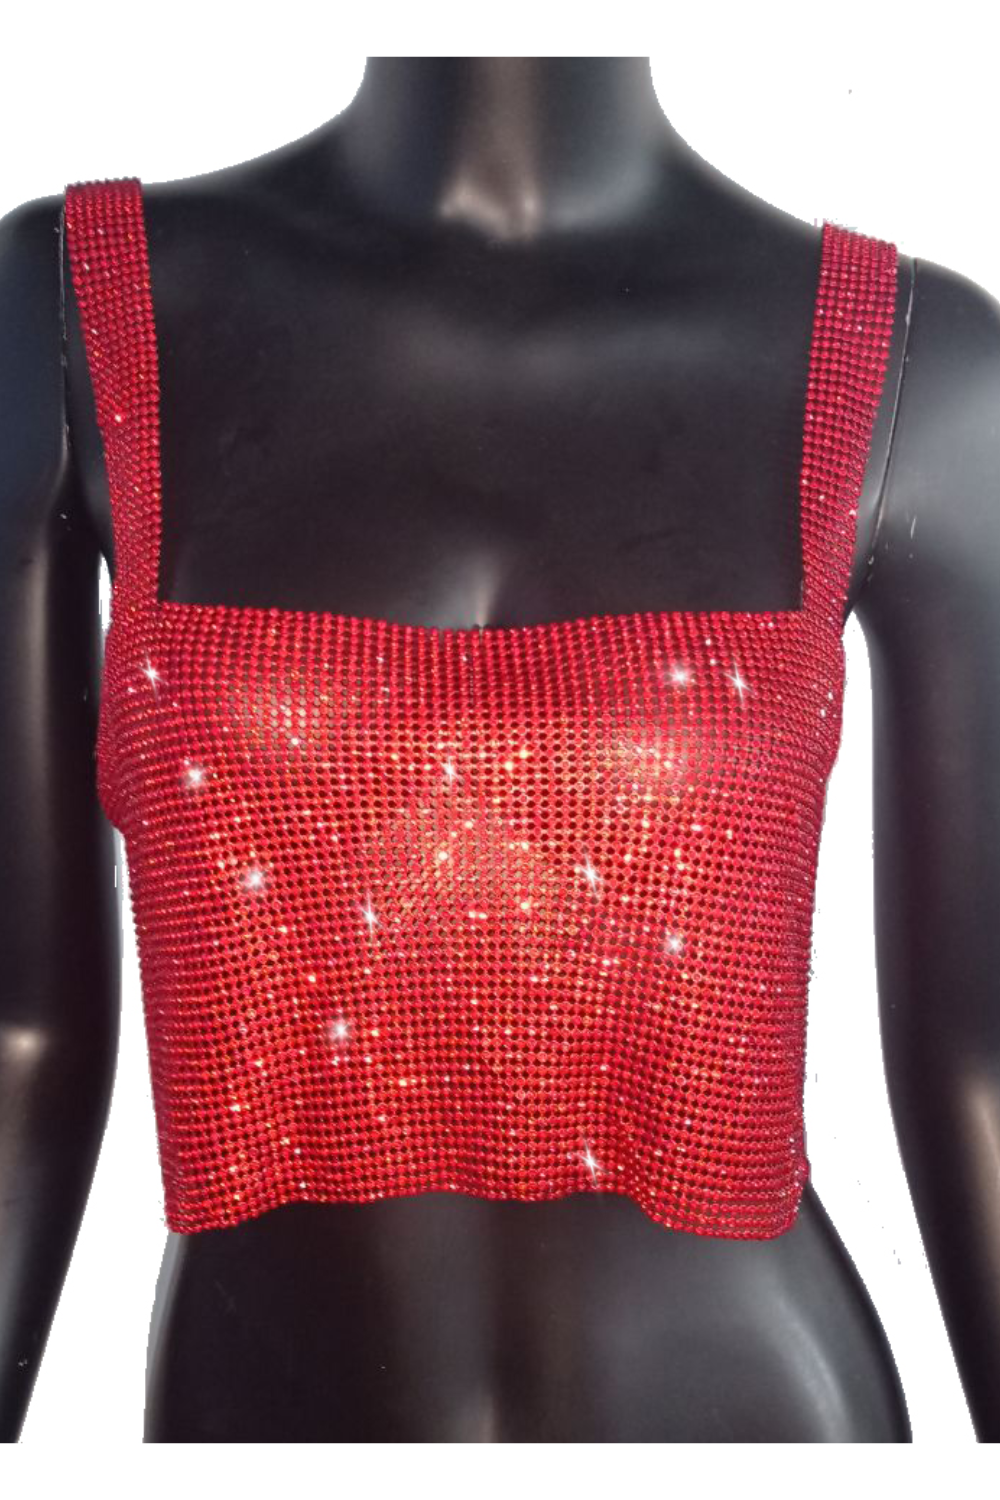 Born To Shine Top - Red